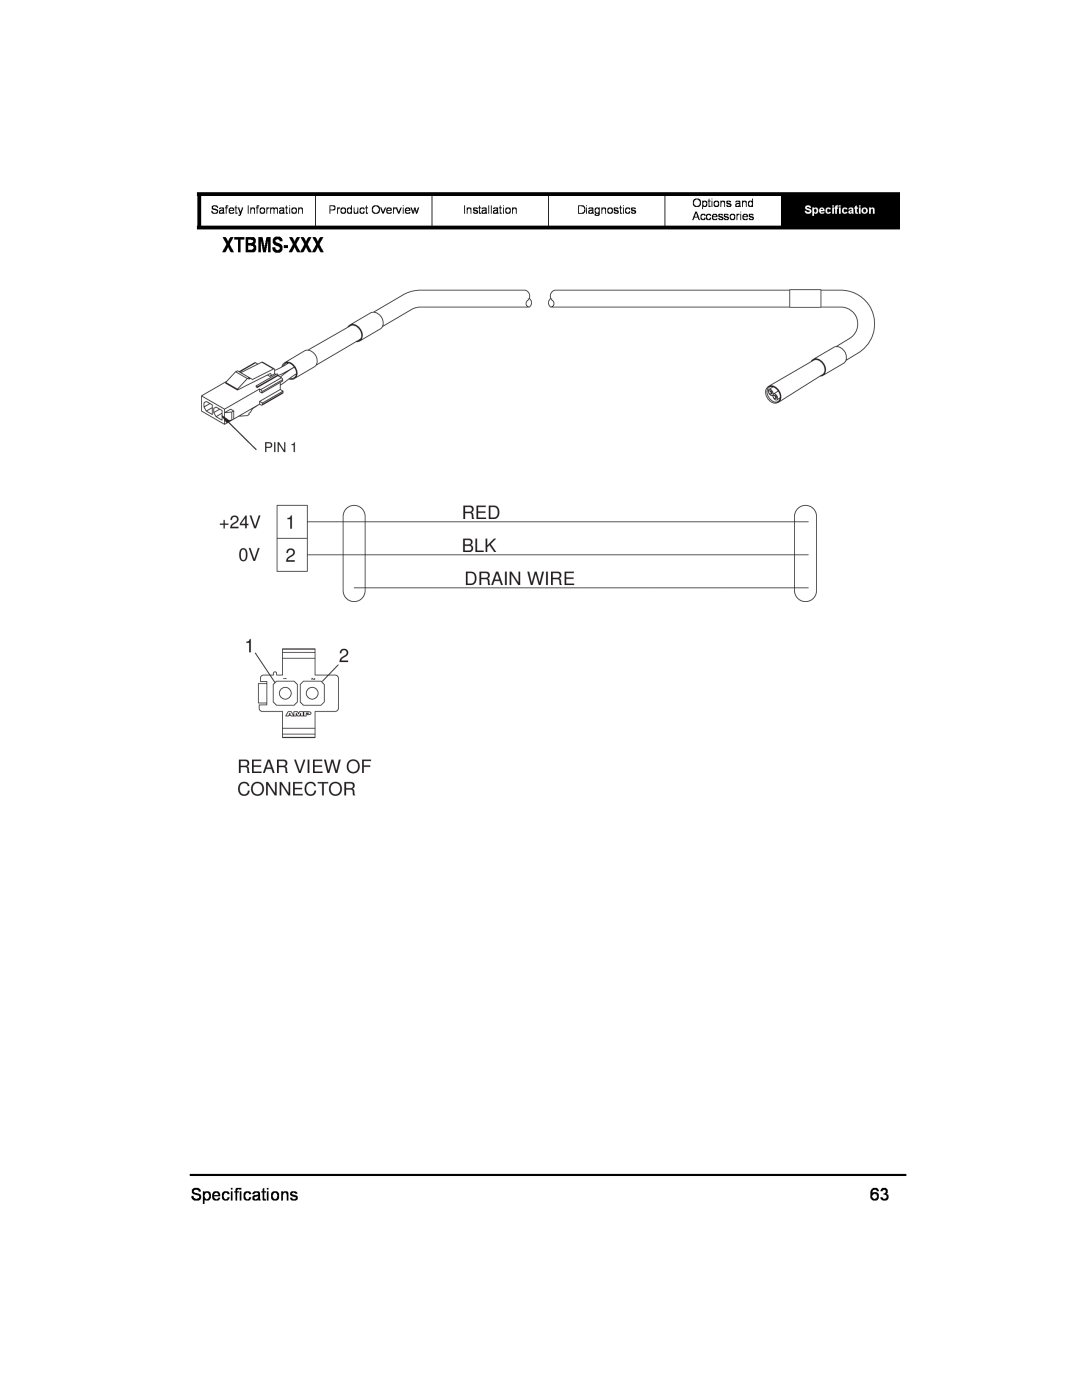 Emerson 400518-01 installation manual Xtbms-Xxx, Drain Wire, Rear View Of Connector, Specification 